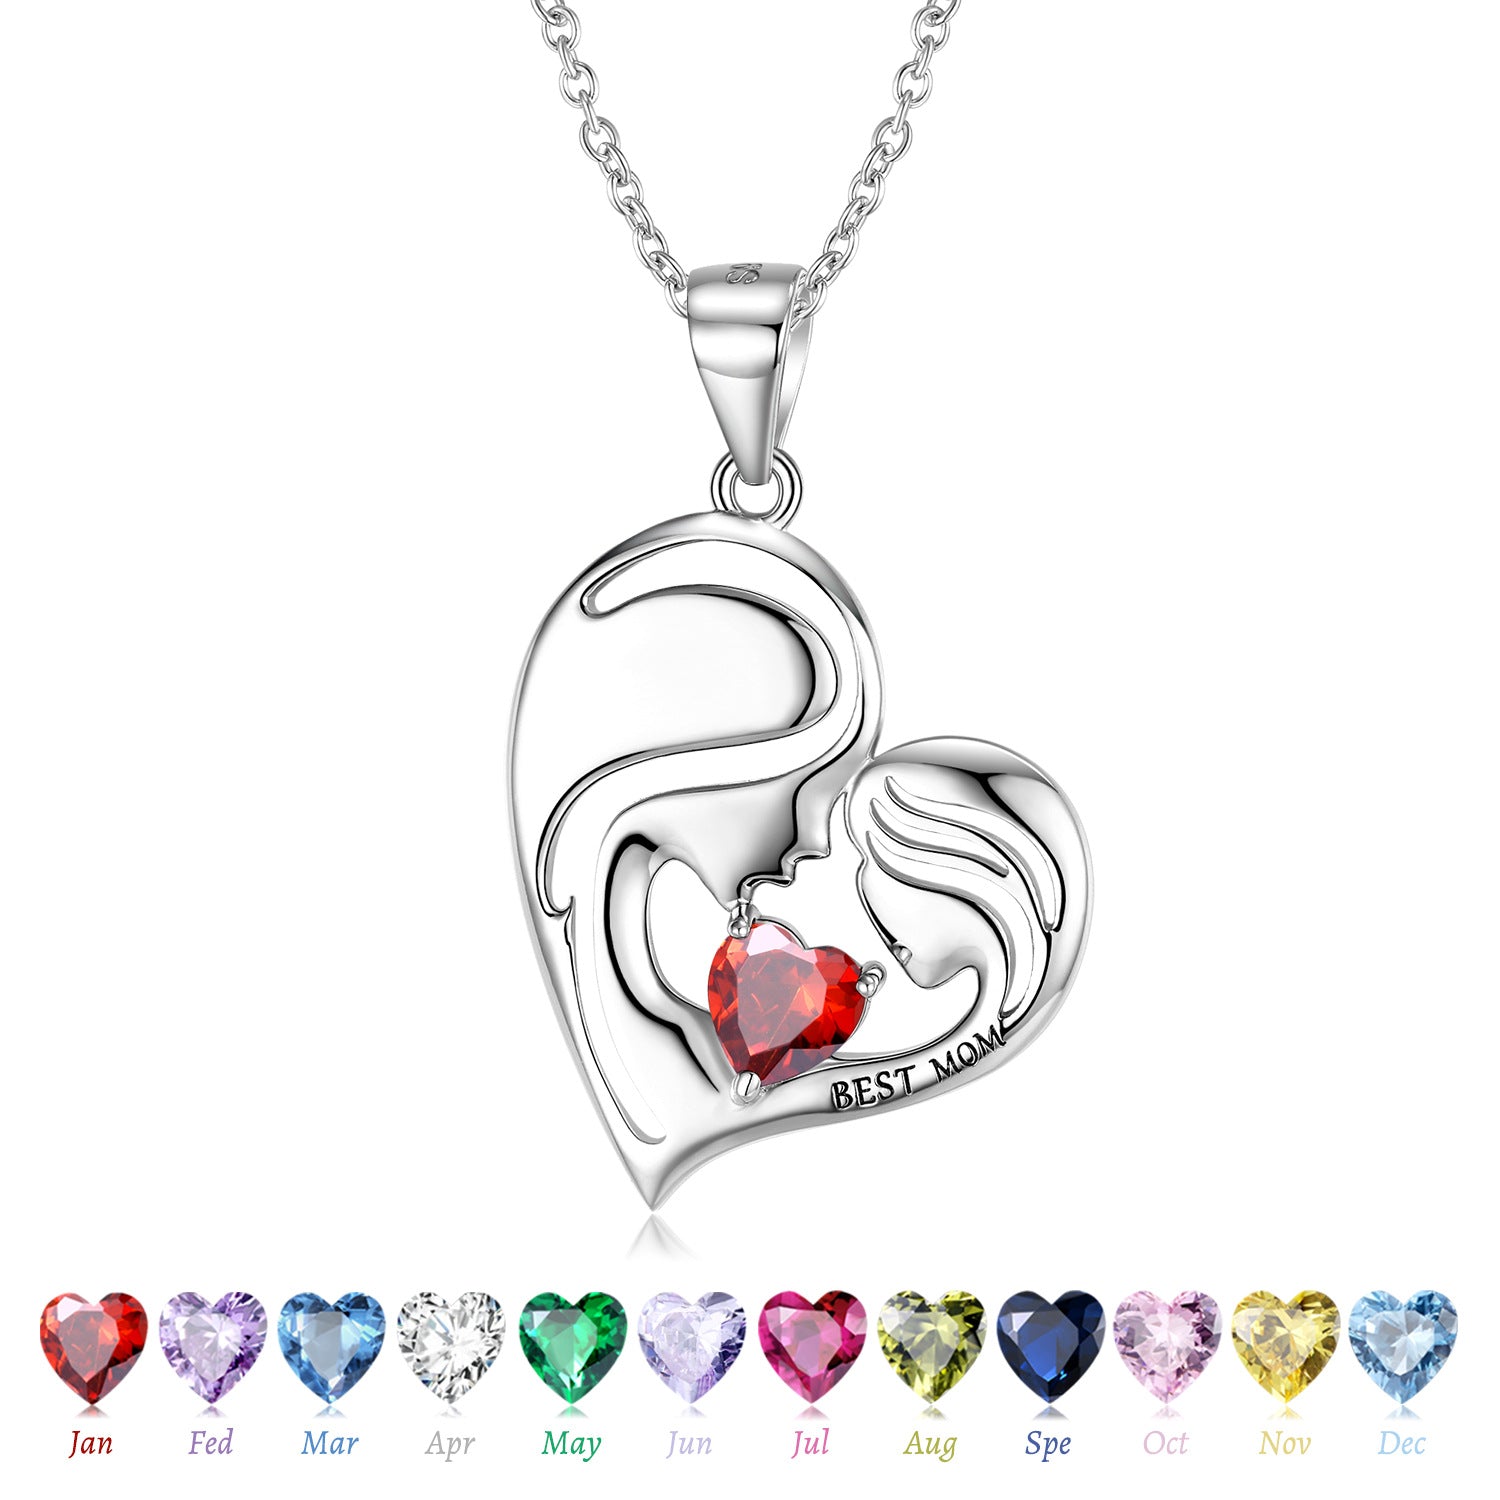 Sterling Silver Best Mom Necklace